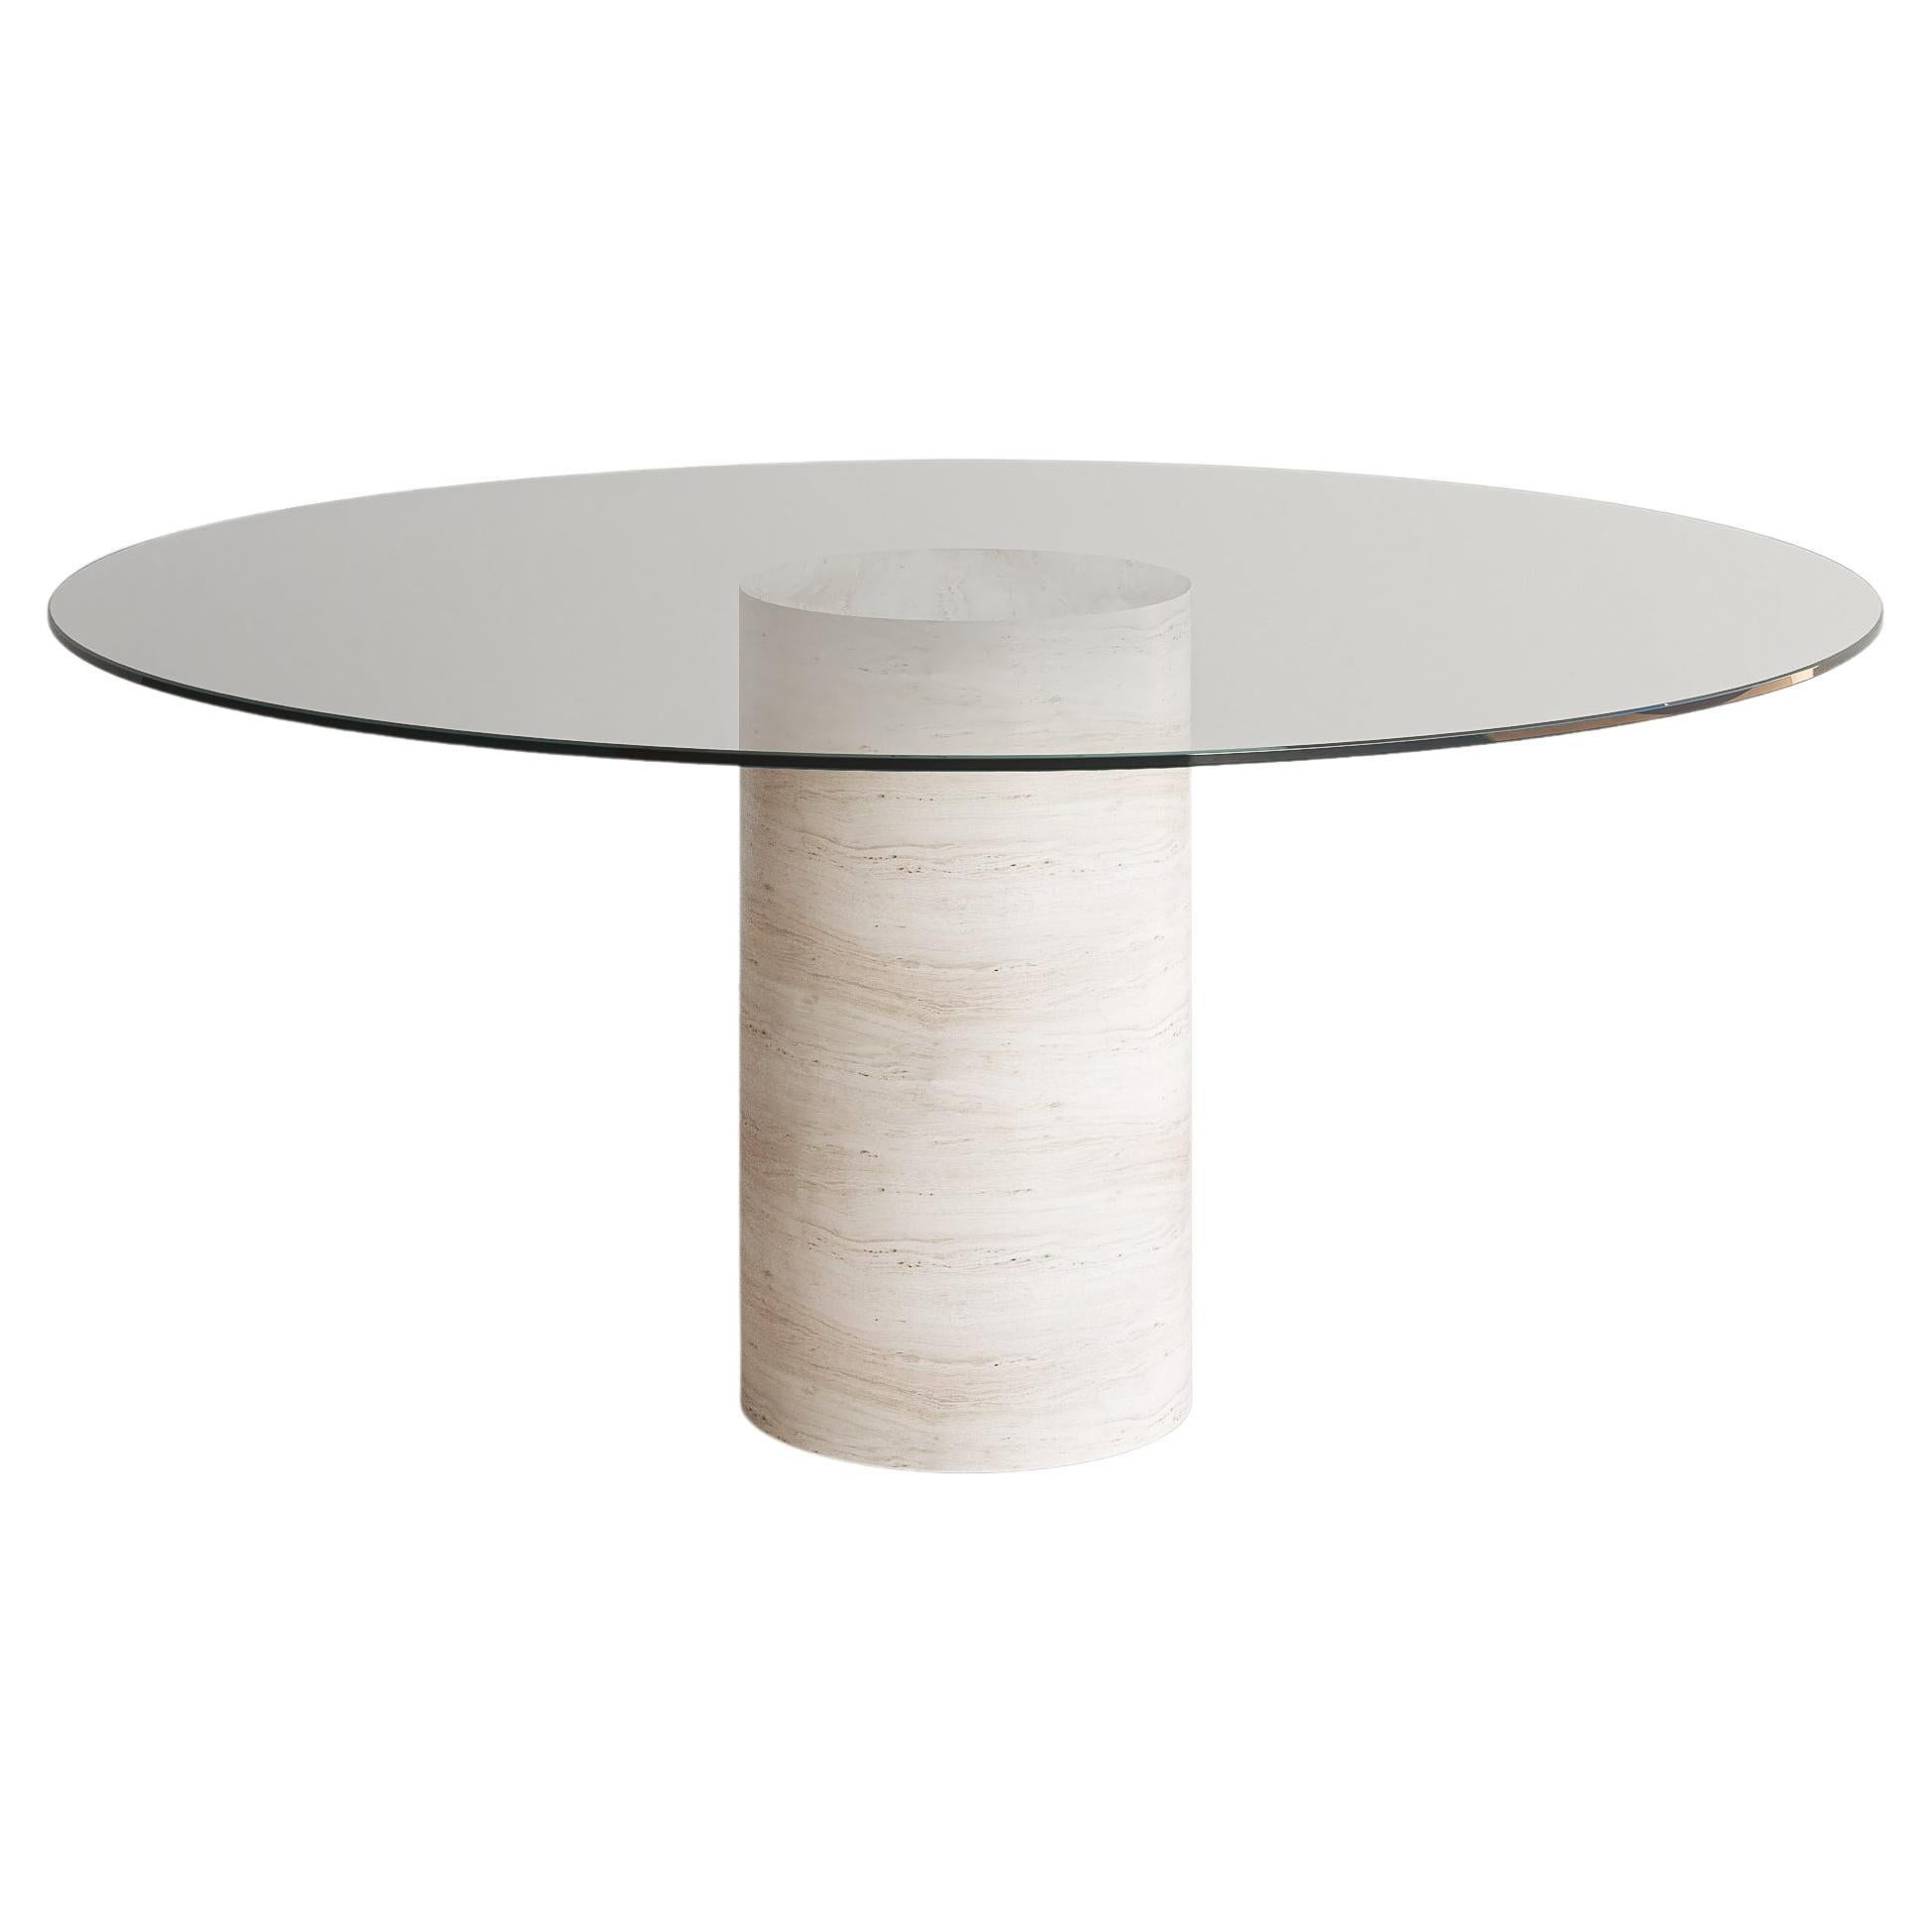 Voyage Dining Table I 'Glass'in Bianco Travertine For Sale